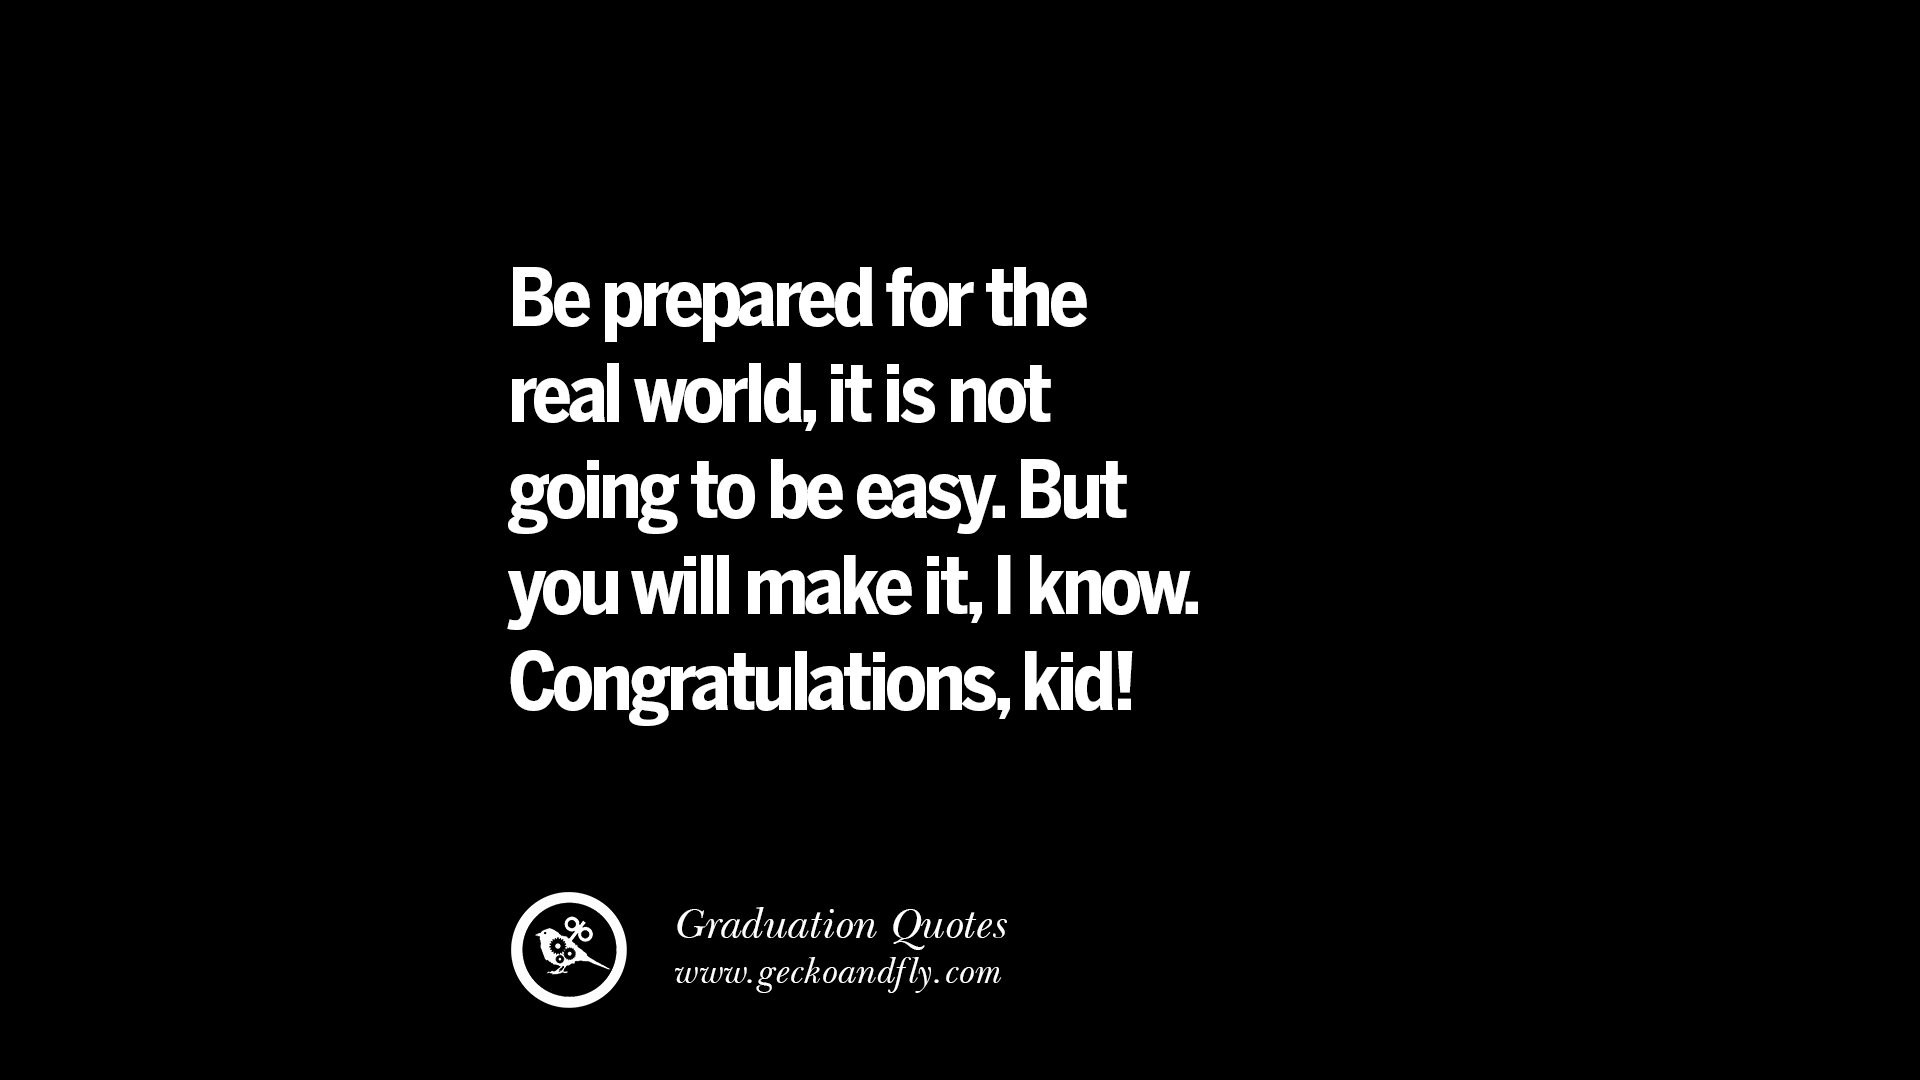 Quote About Graduation From High School
 30 Inspirational Quotes on Graduation For High School And